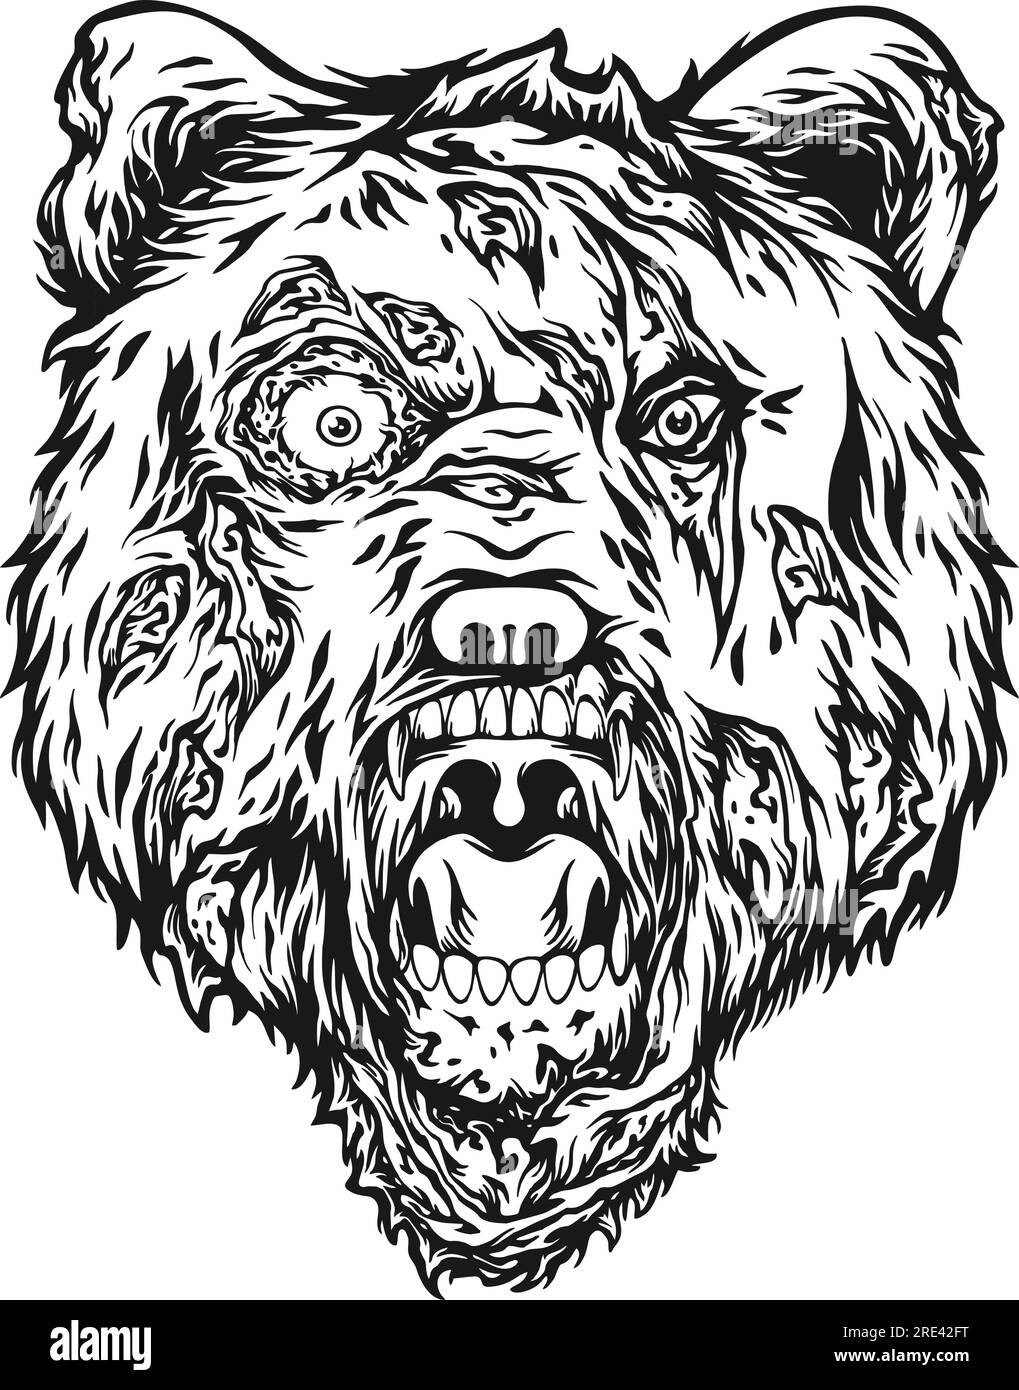 Mysterious horror zombie head bear monster outline vector illustrations for your work logo, merchandise t-shirt, stickers and label designs, poster, g Stock Vector